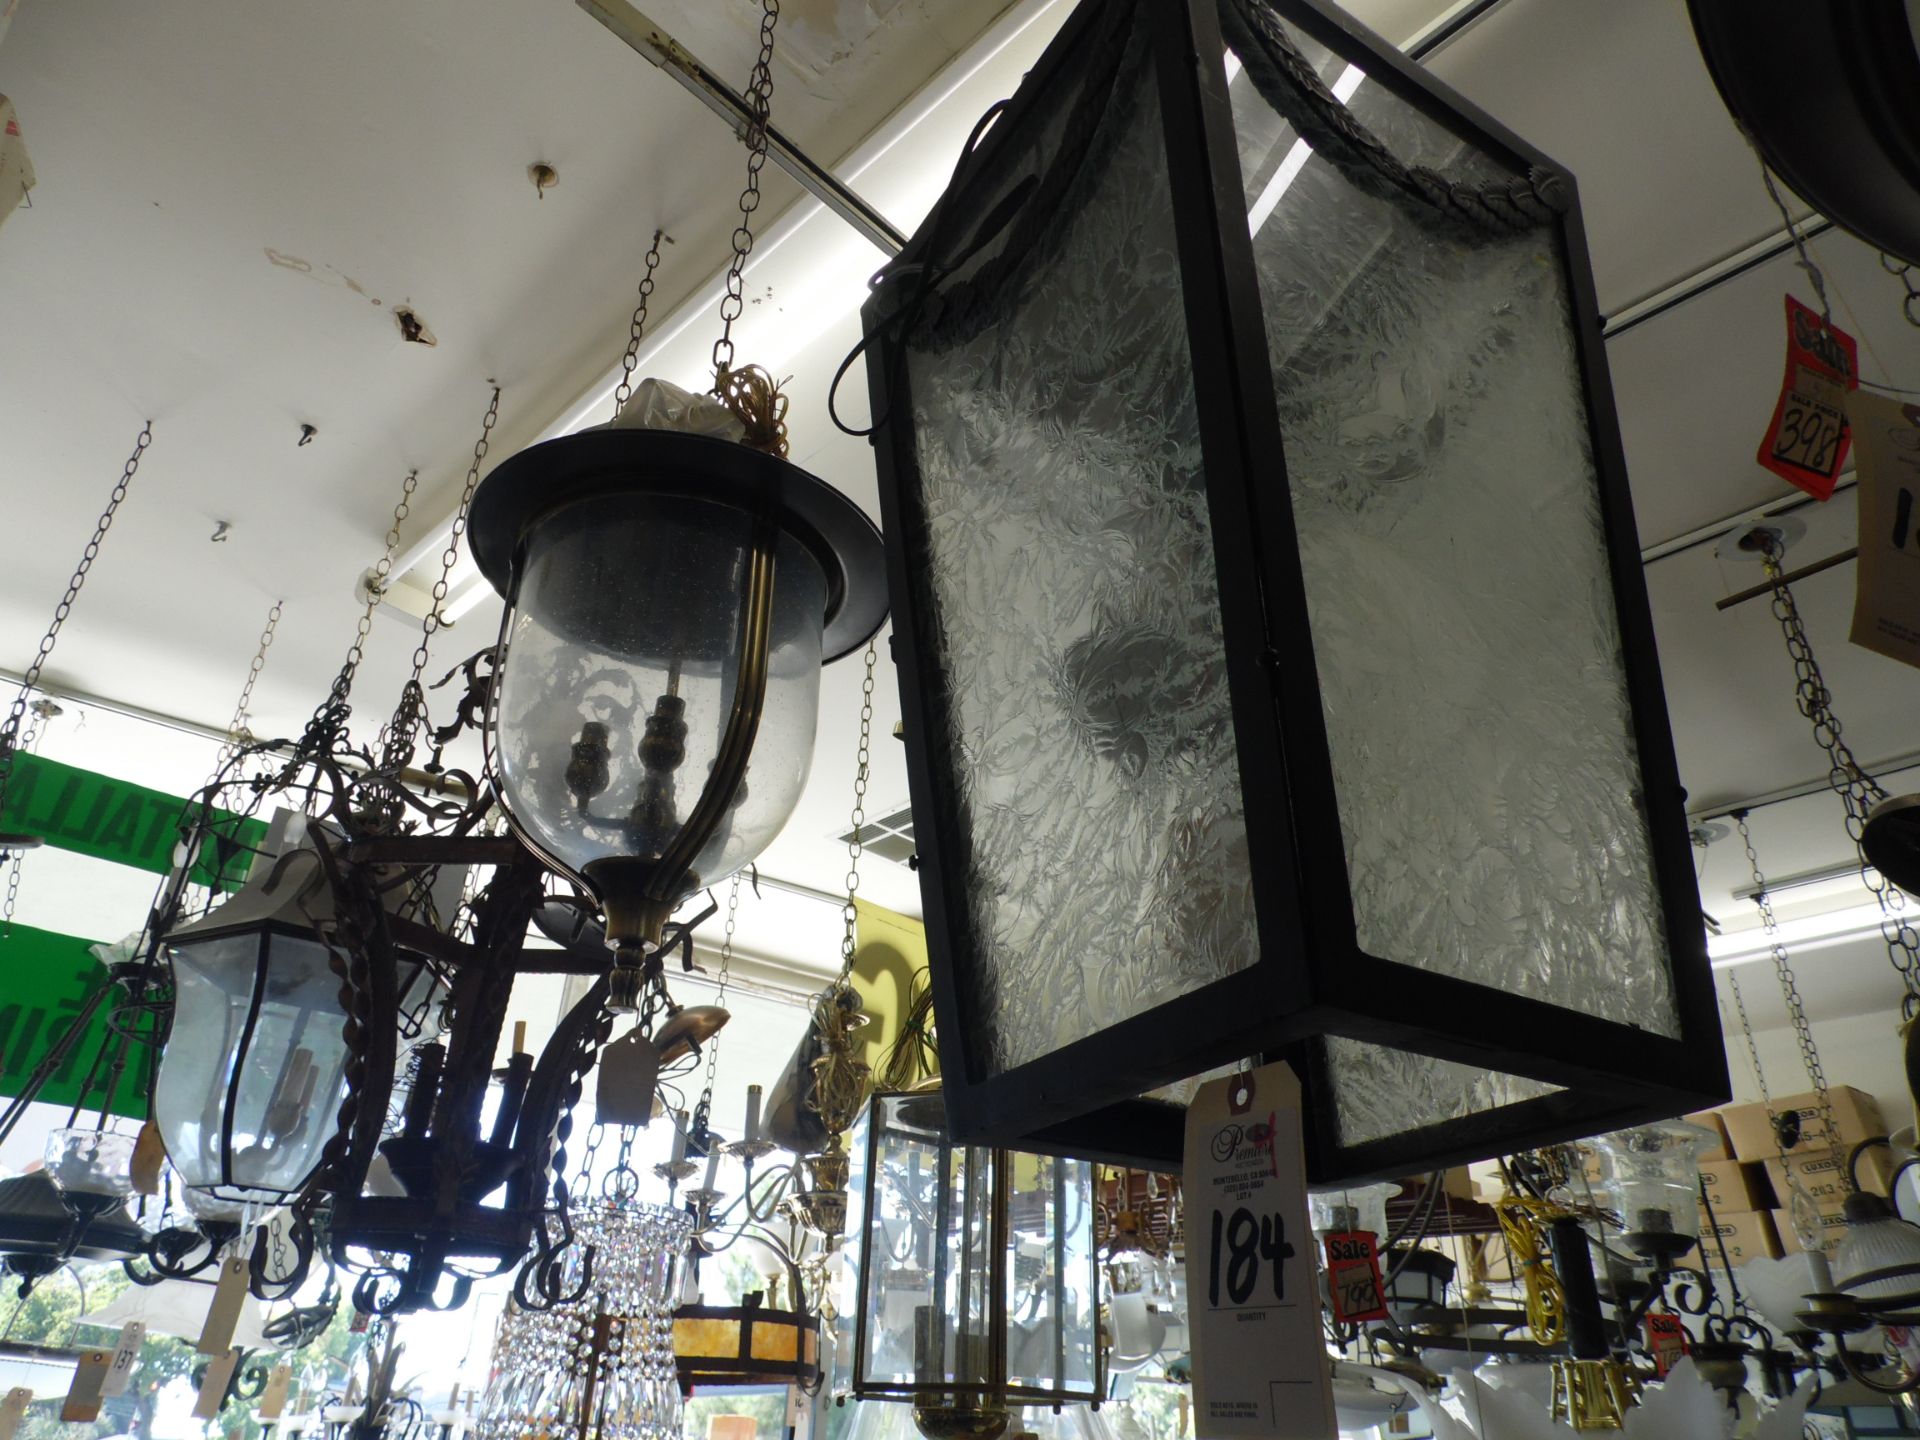 ASSORTED HANGING LAMPS ON CEILING